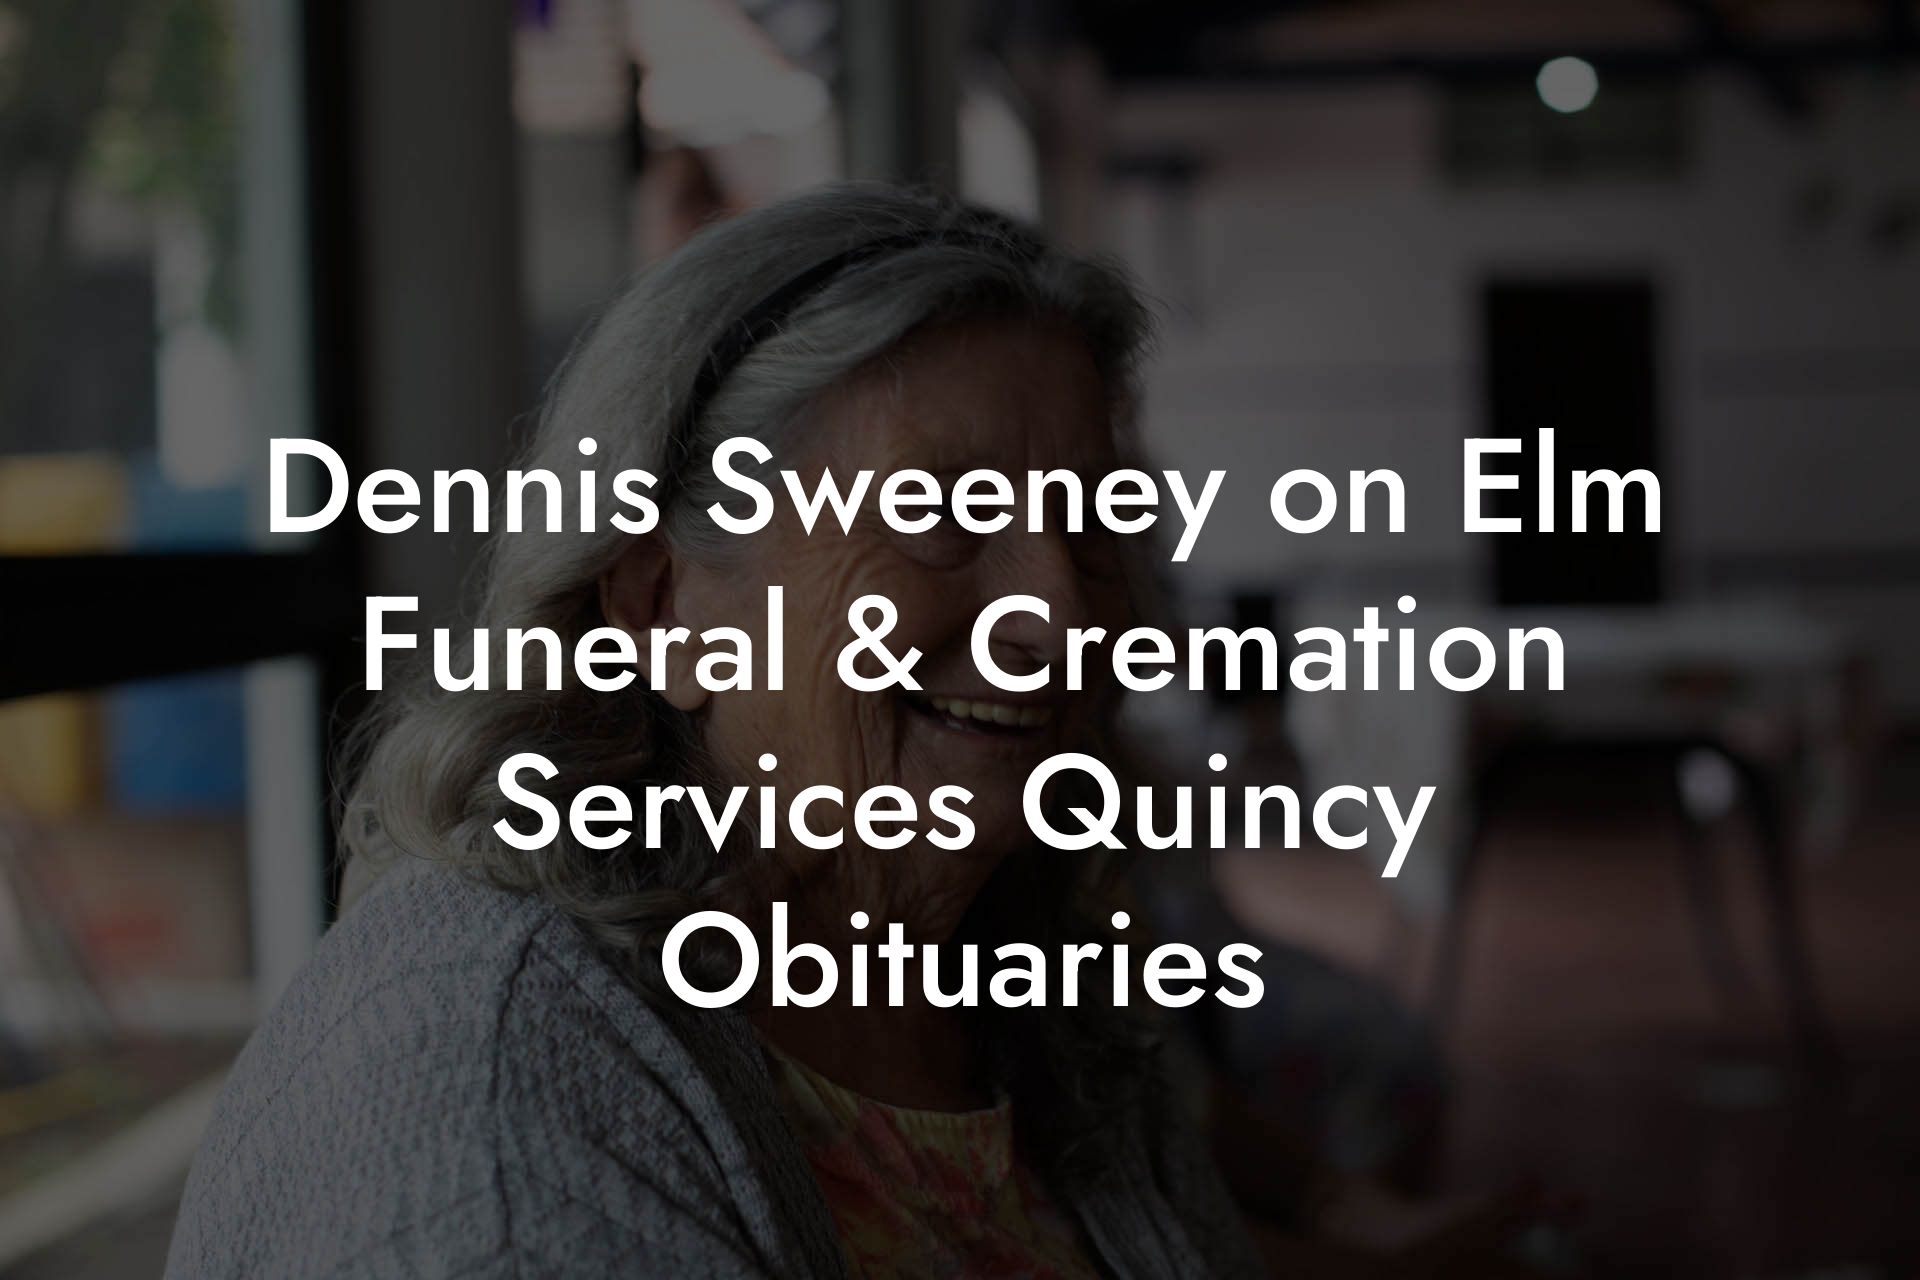 Dennis Sweeney on Elm Funeral & Cremation Services Quincy Obituaries